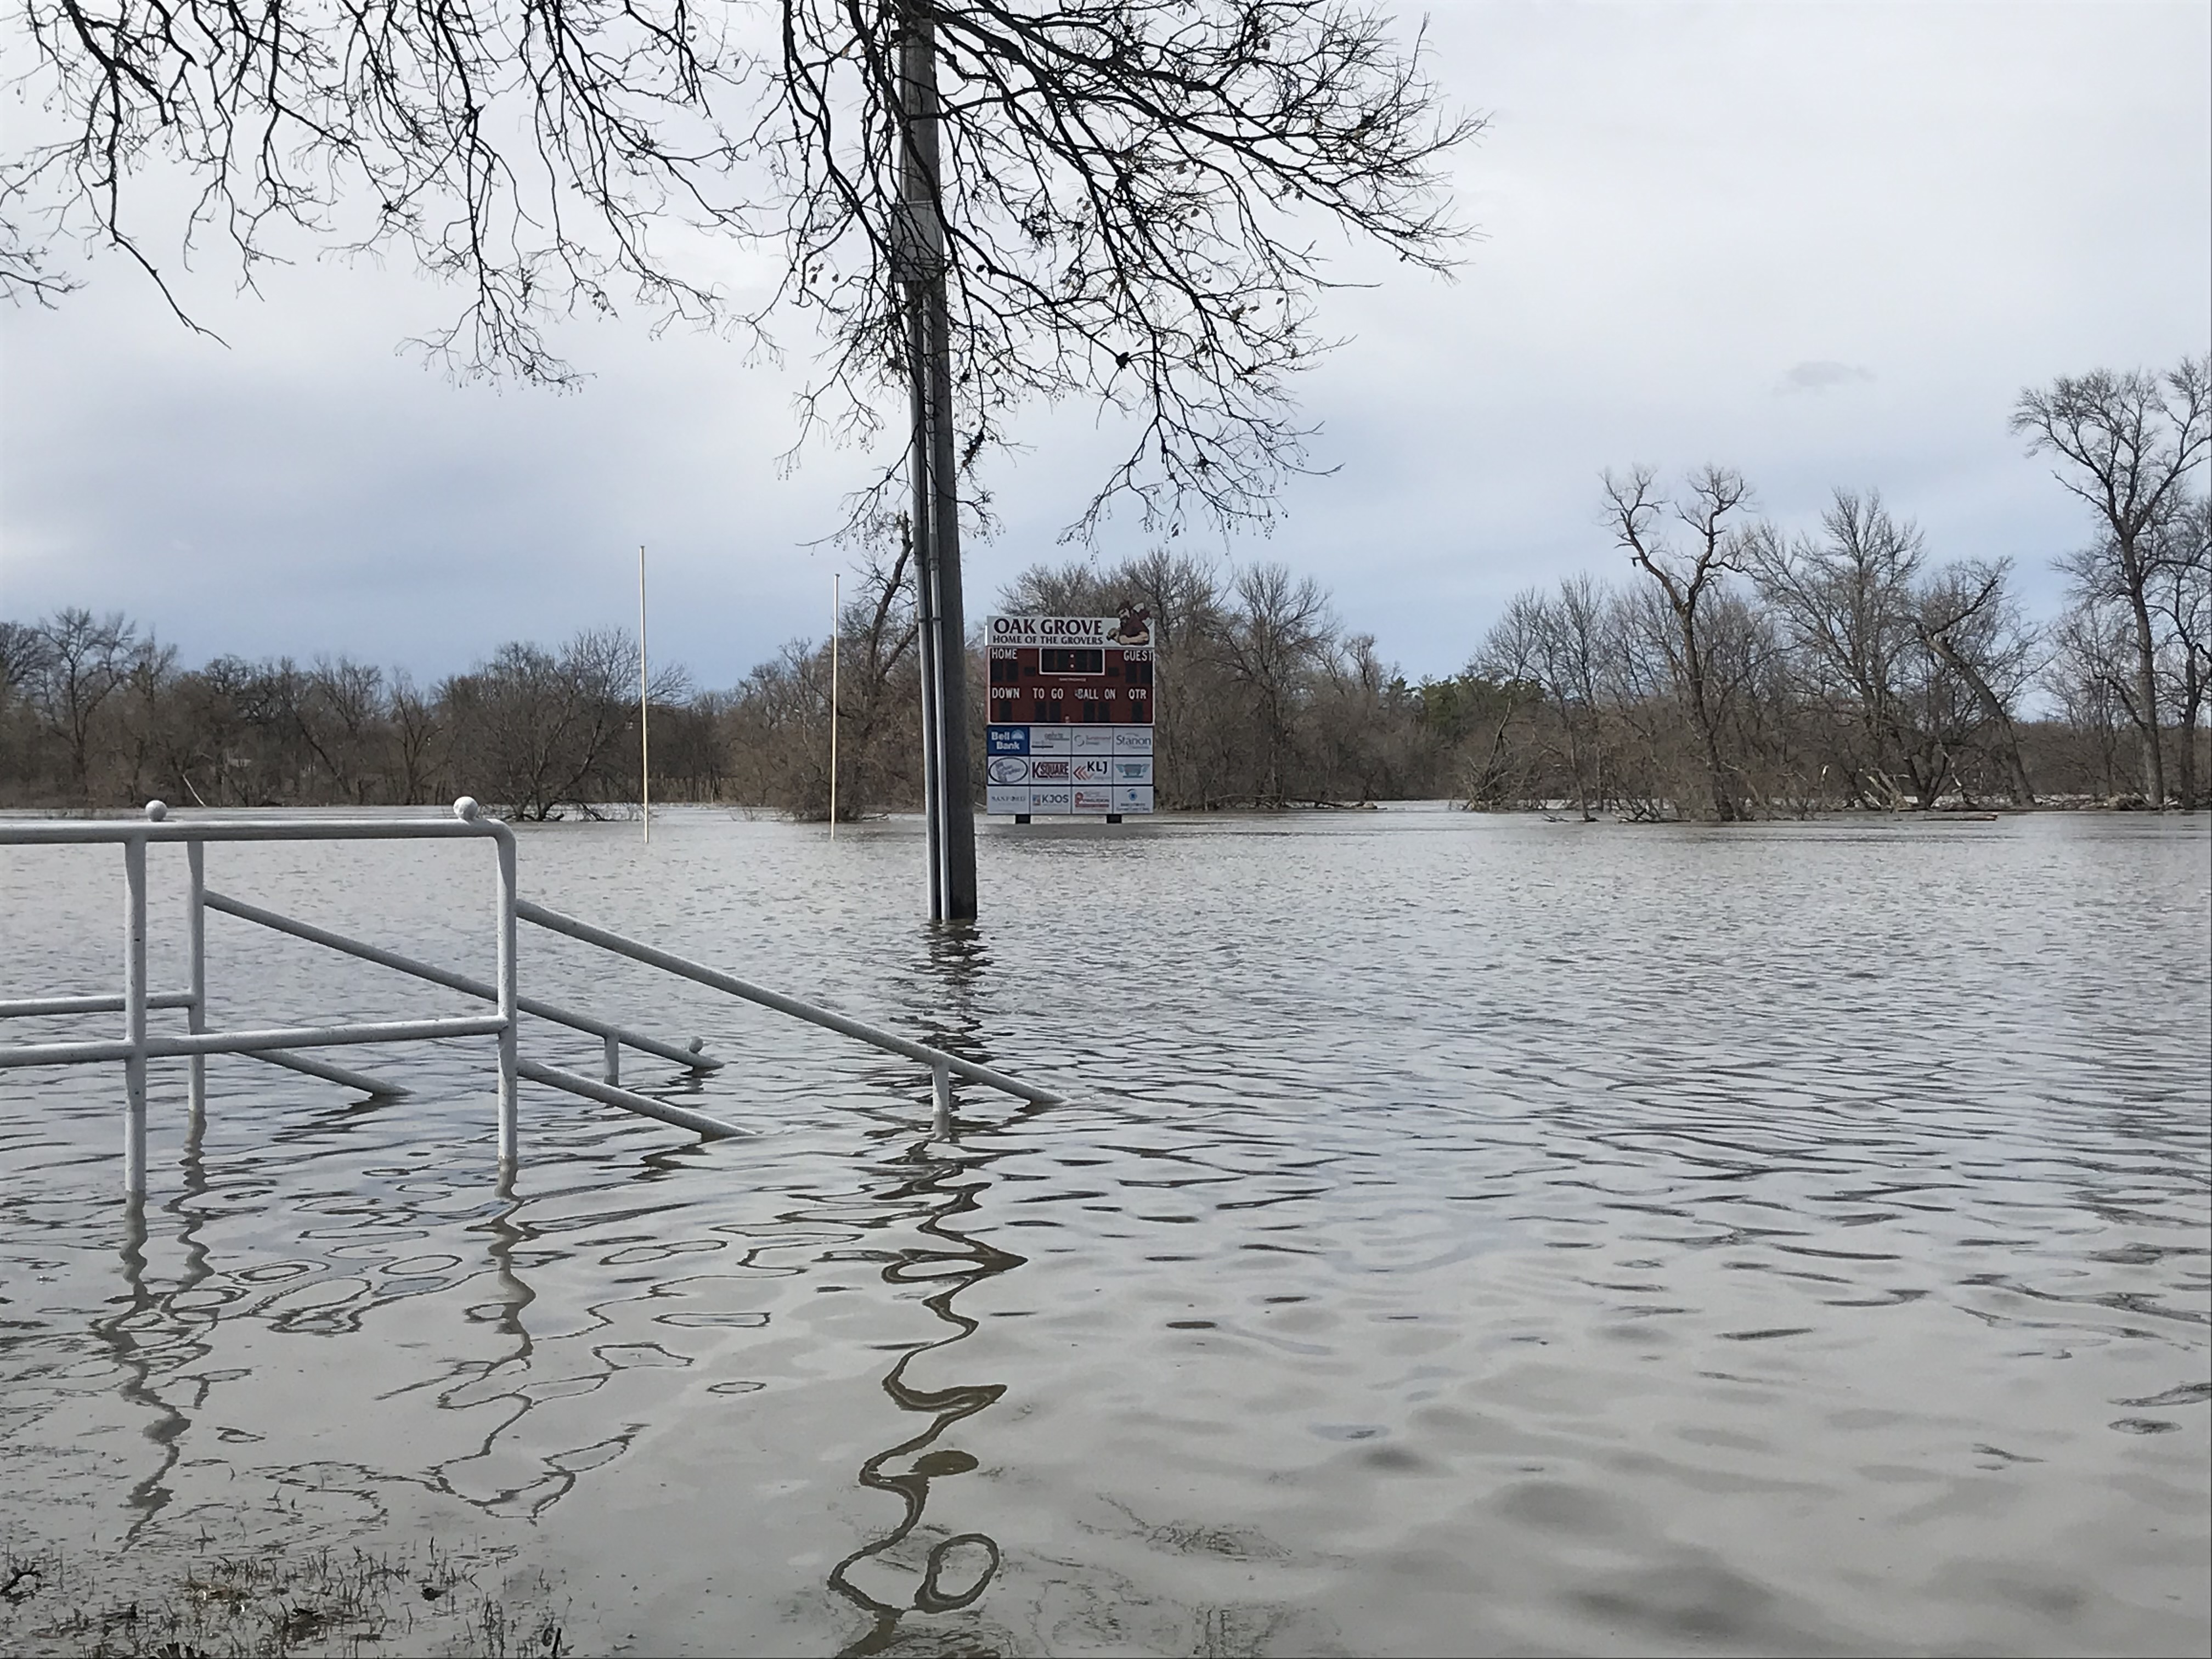 Members of the CoCoRaHS Network collect data that can help predict flooding like this. (NDSU photo)